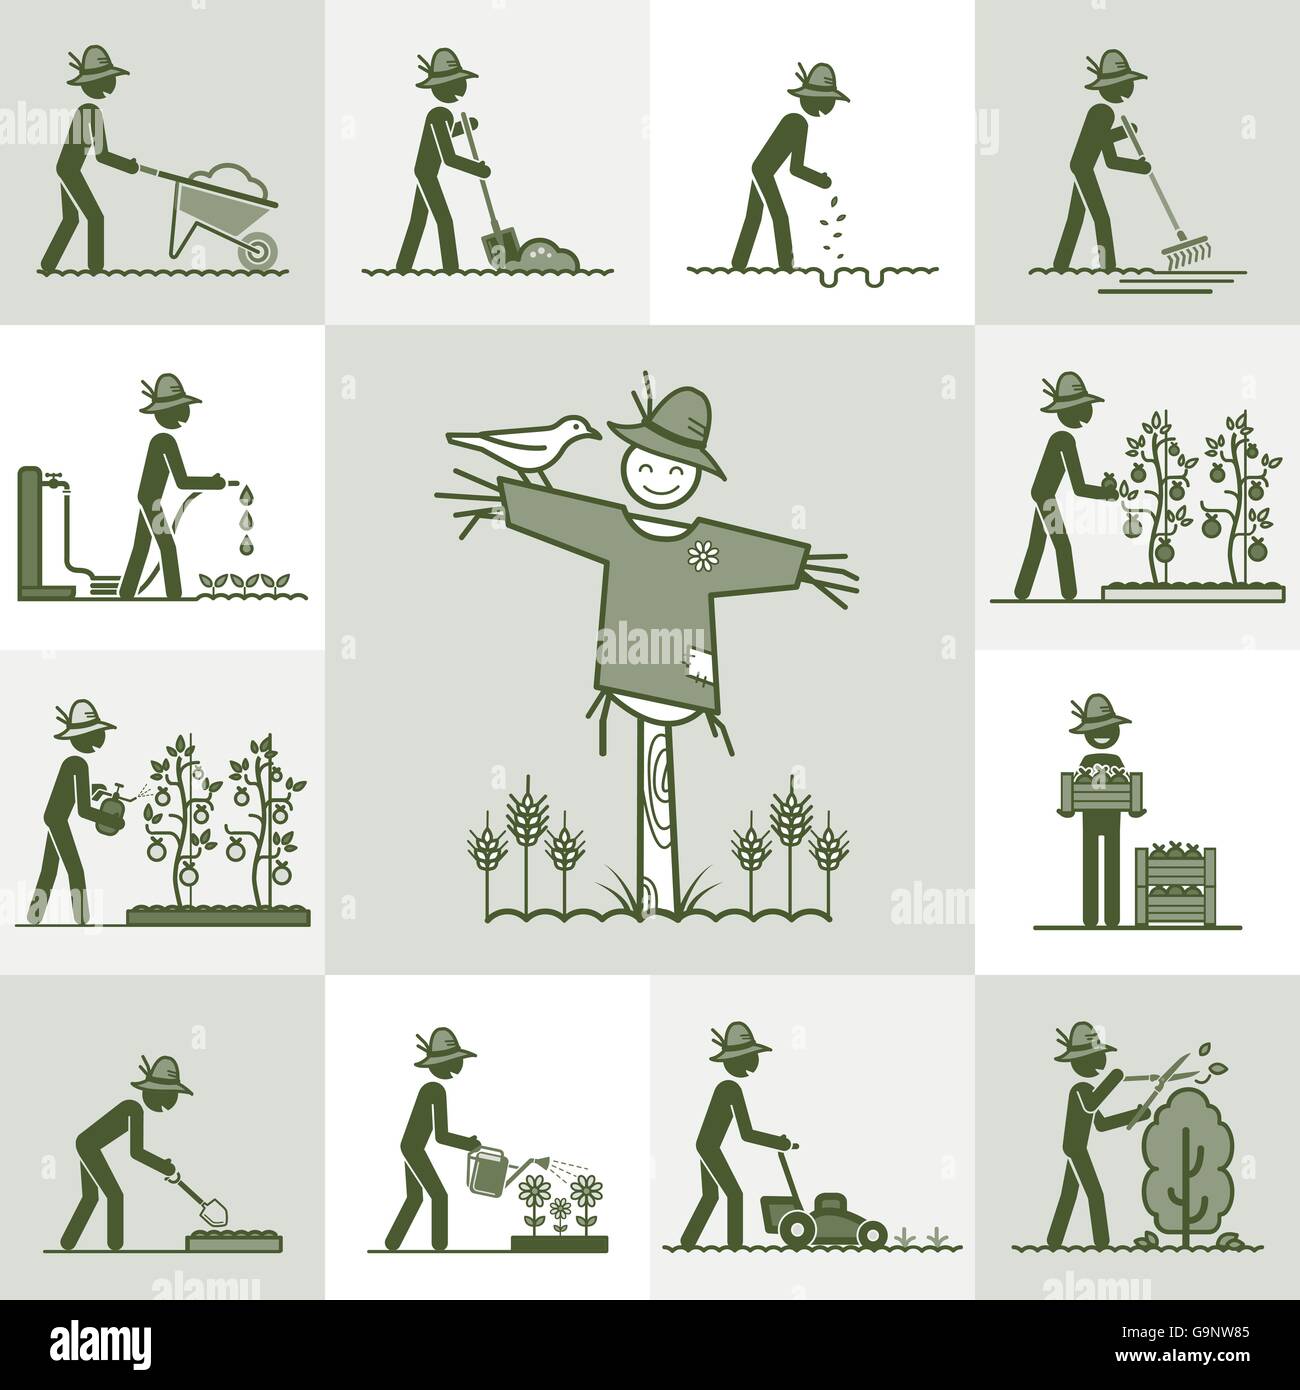 Gardening and landscaping illustration with stick figures and scarecrow Stock Vector